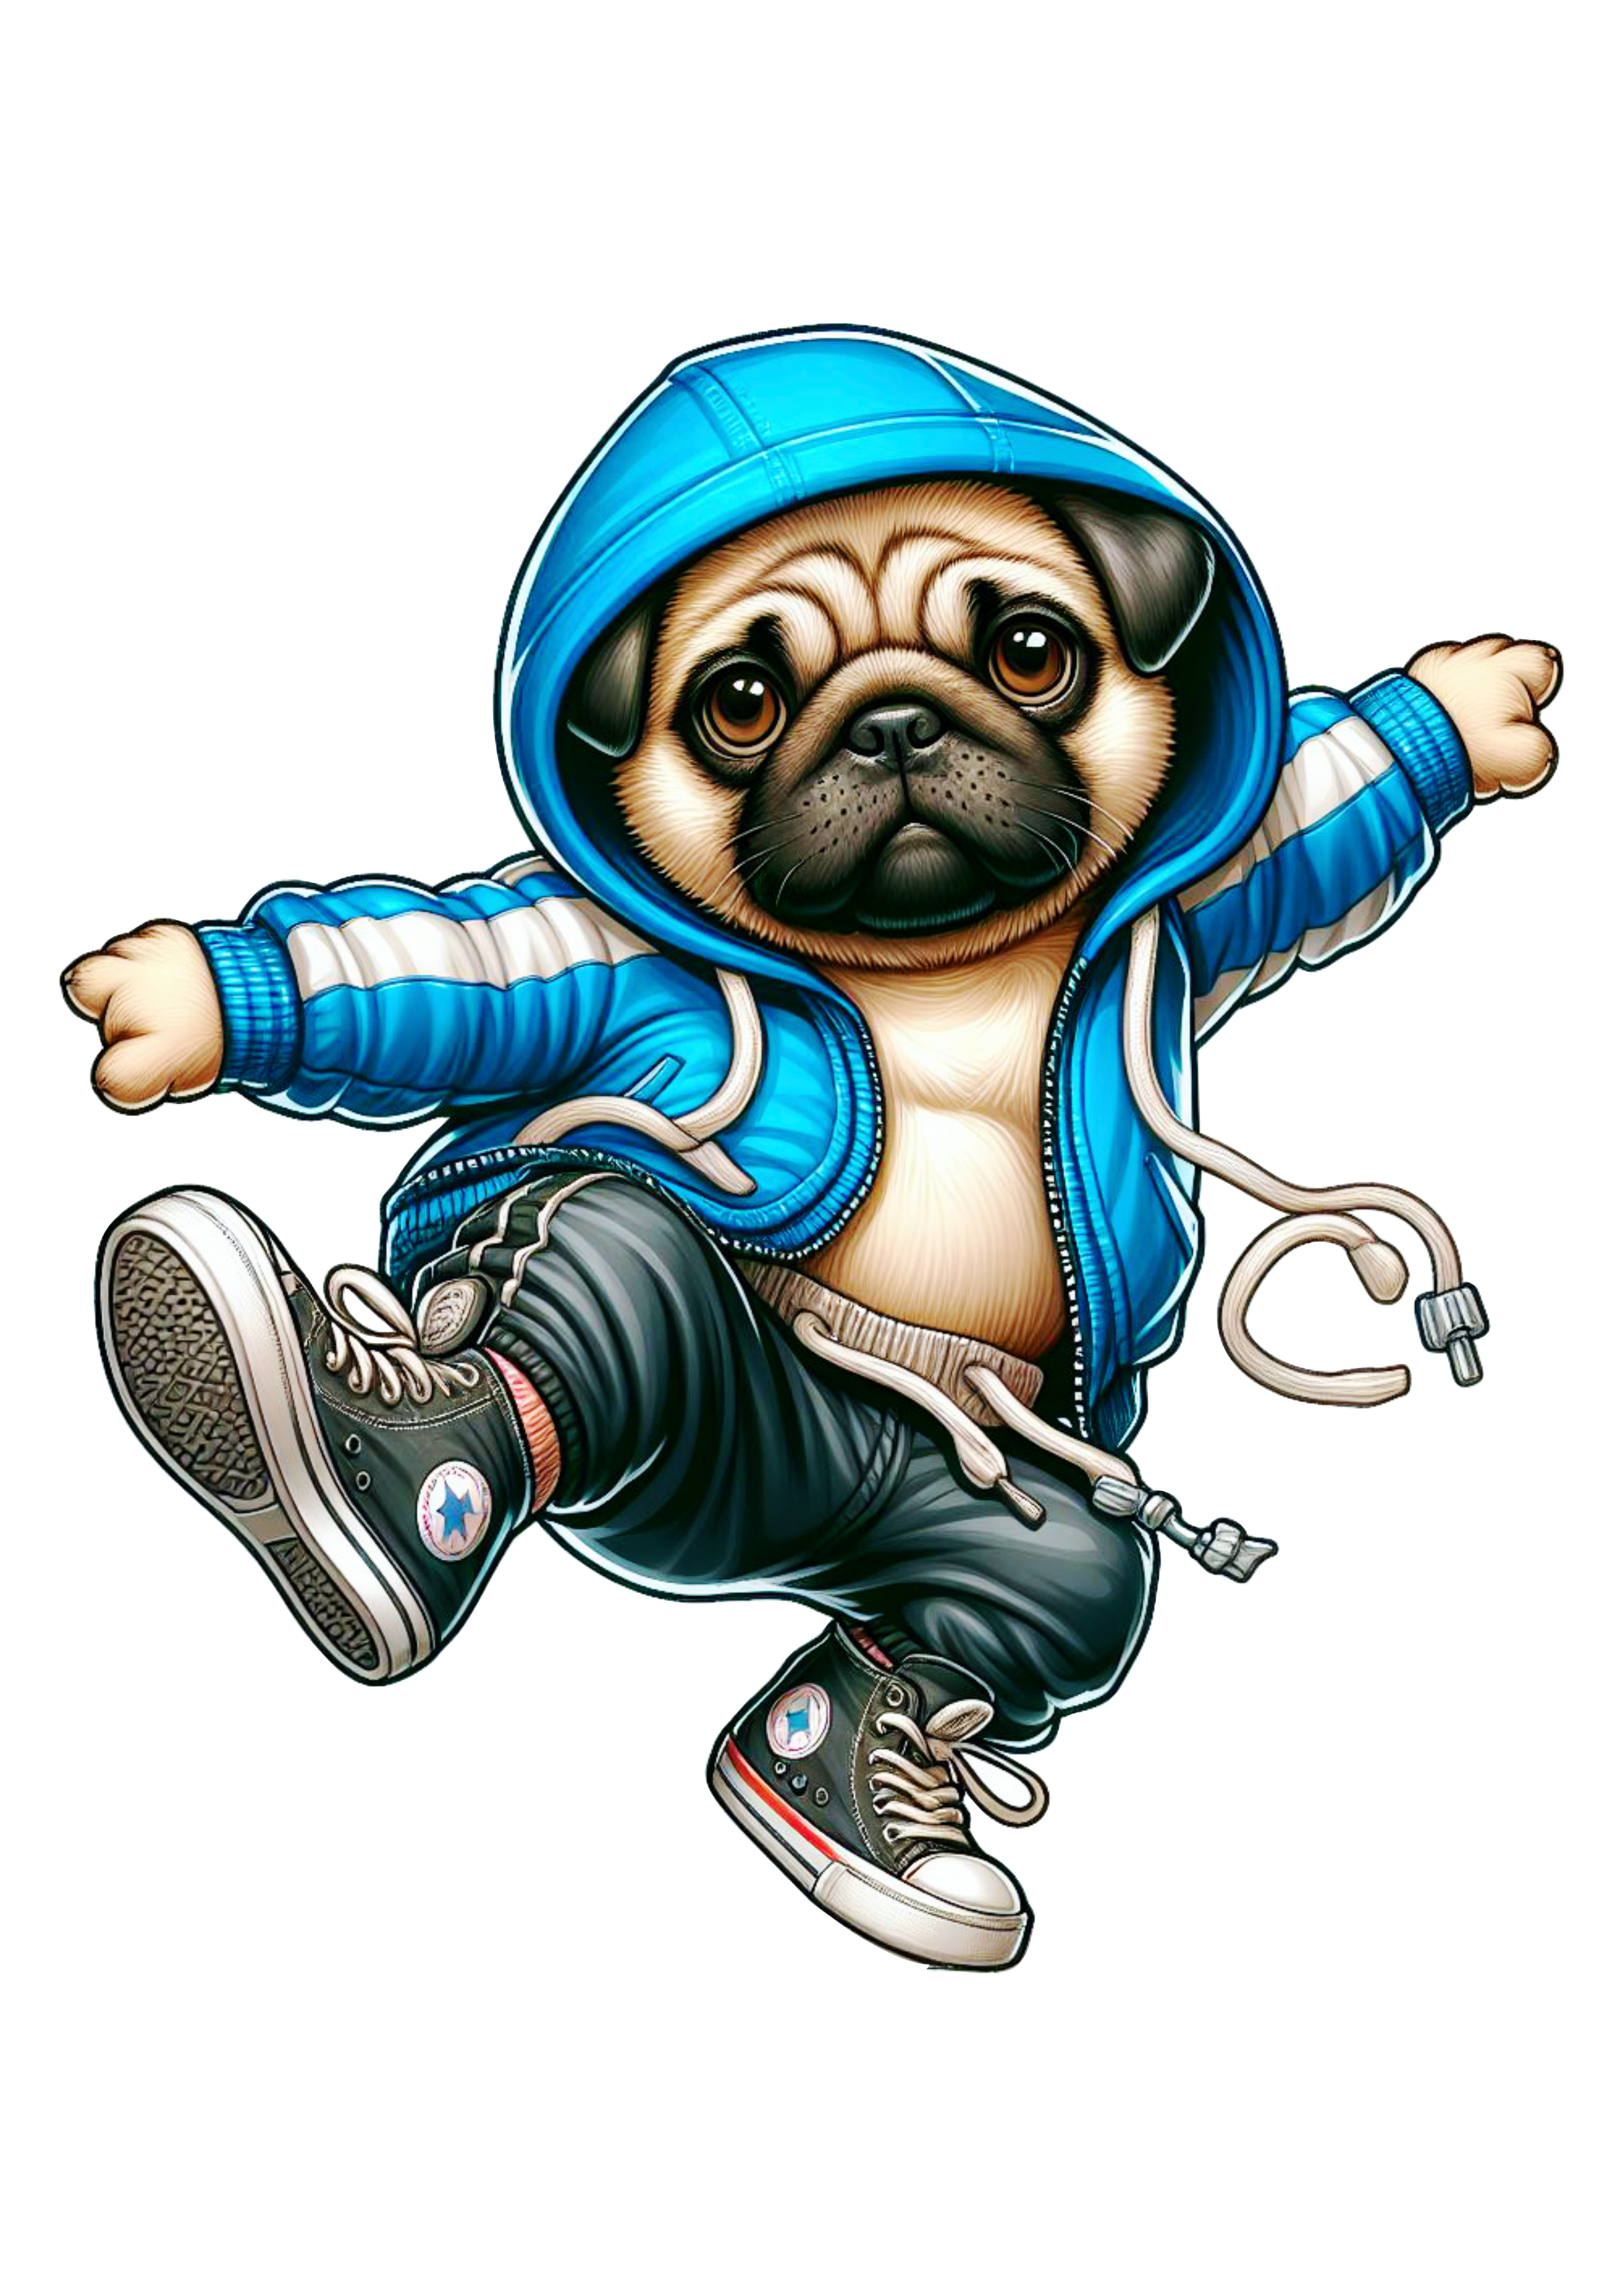 Cute doggo png pug dancing Breakdance transparent background clipart vector